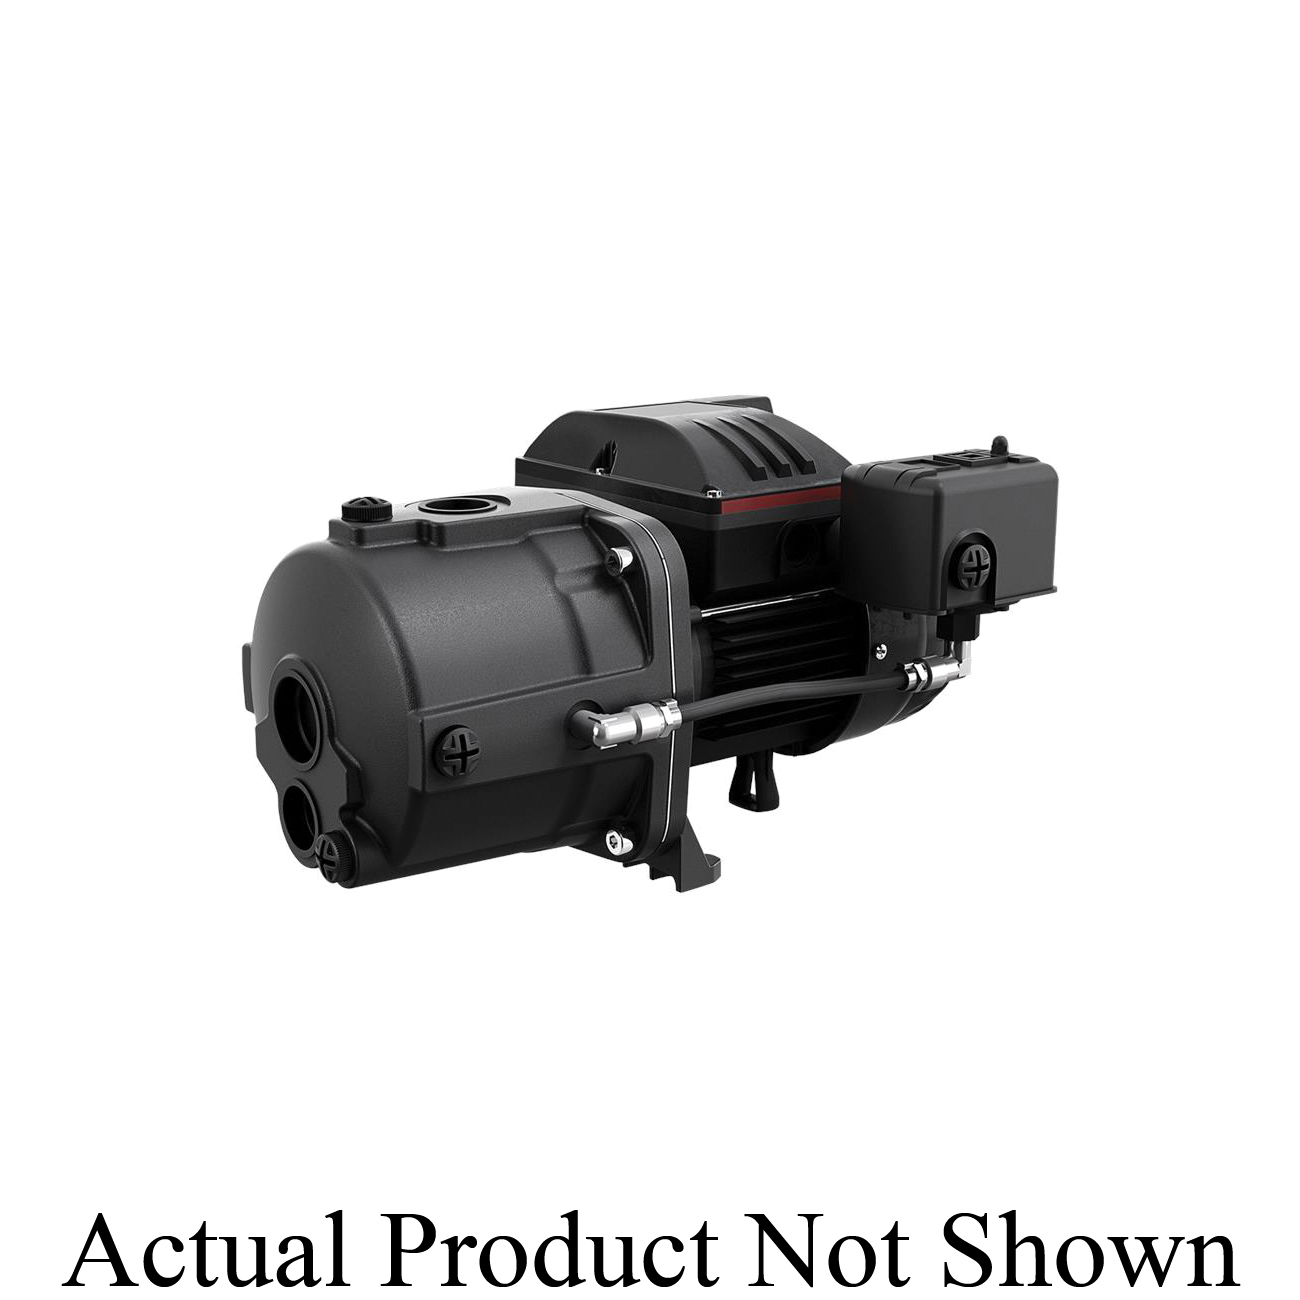 Grundfos 97855073 JP Series 1-Stage Centrifugal Jet Pump, 15.75 gpm Flow Rate, 1 in NPT Inlet x 1 in NPT Outlet, 1 ph, 1/2 hp, Cast Iron